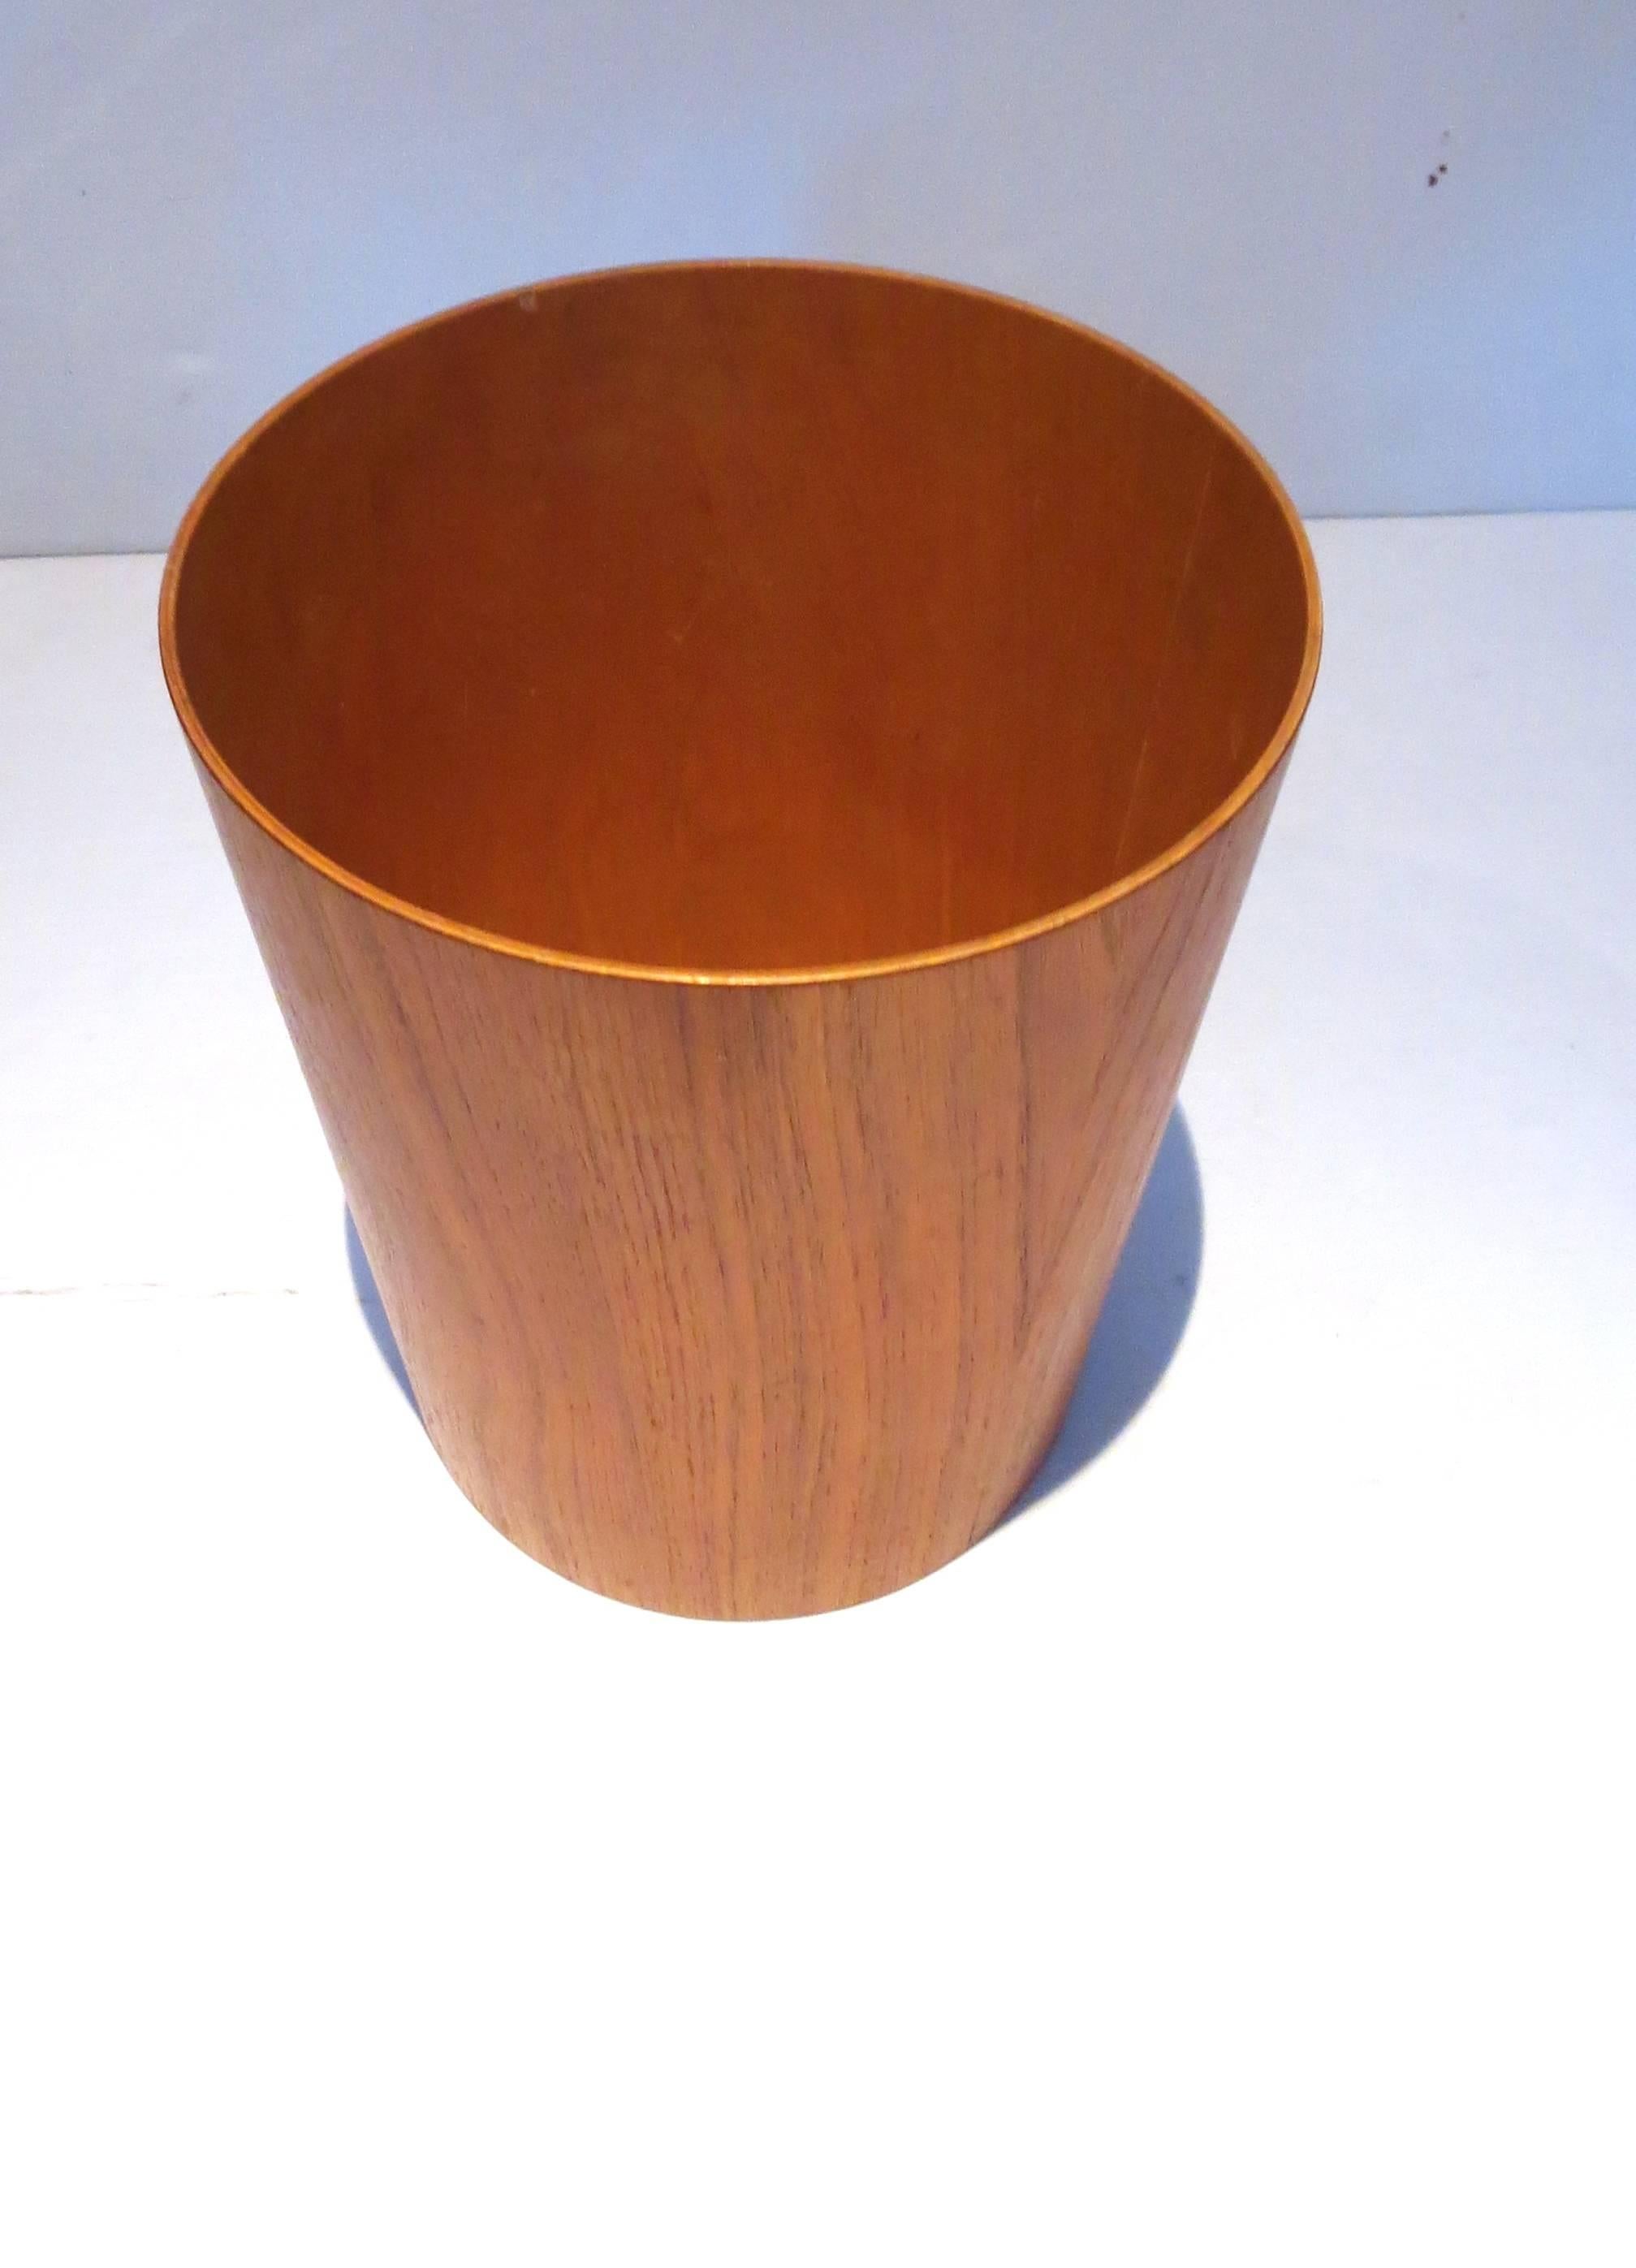 Simple elegant design on this trashcan, waste paper basket, circa 1950s, made in Sweden by Servex excellent condition no chips or cracks, in teak finish all original and in cone shape.